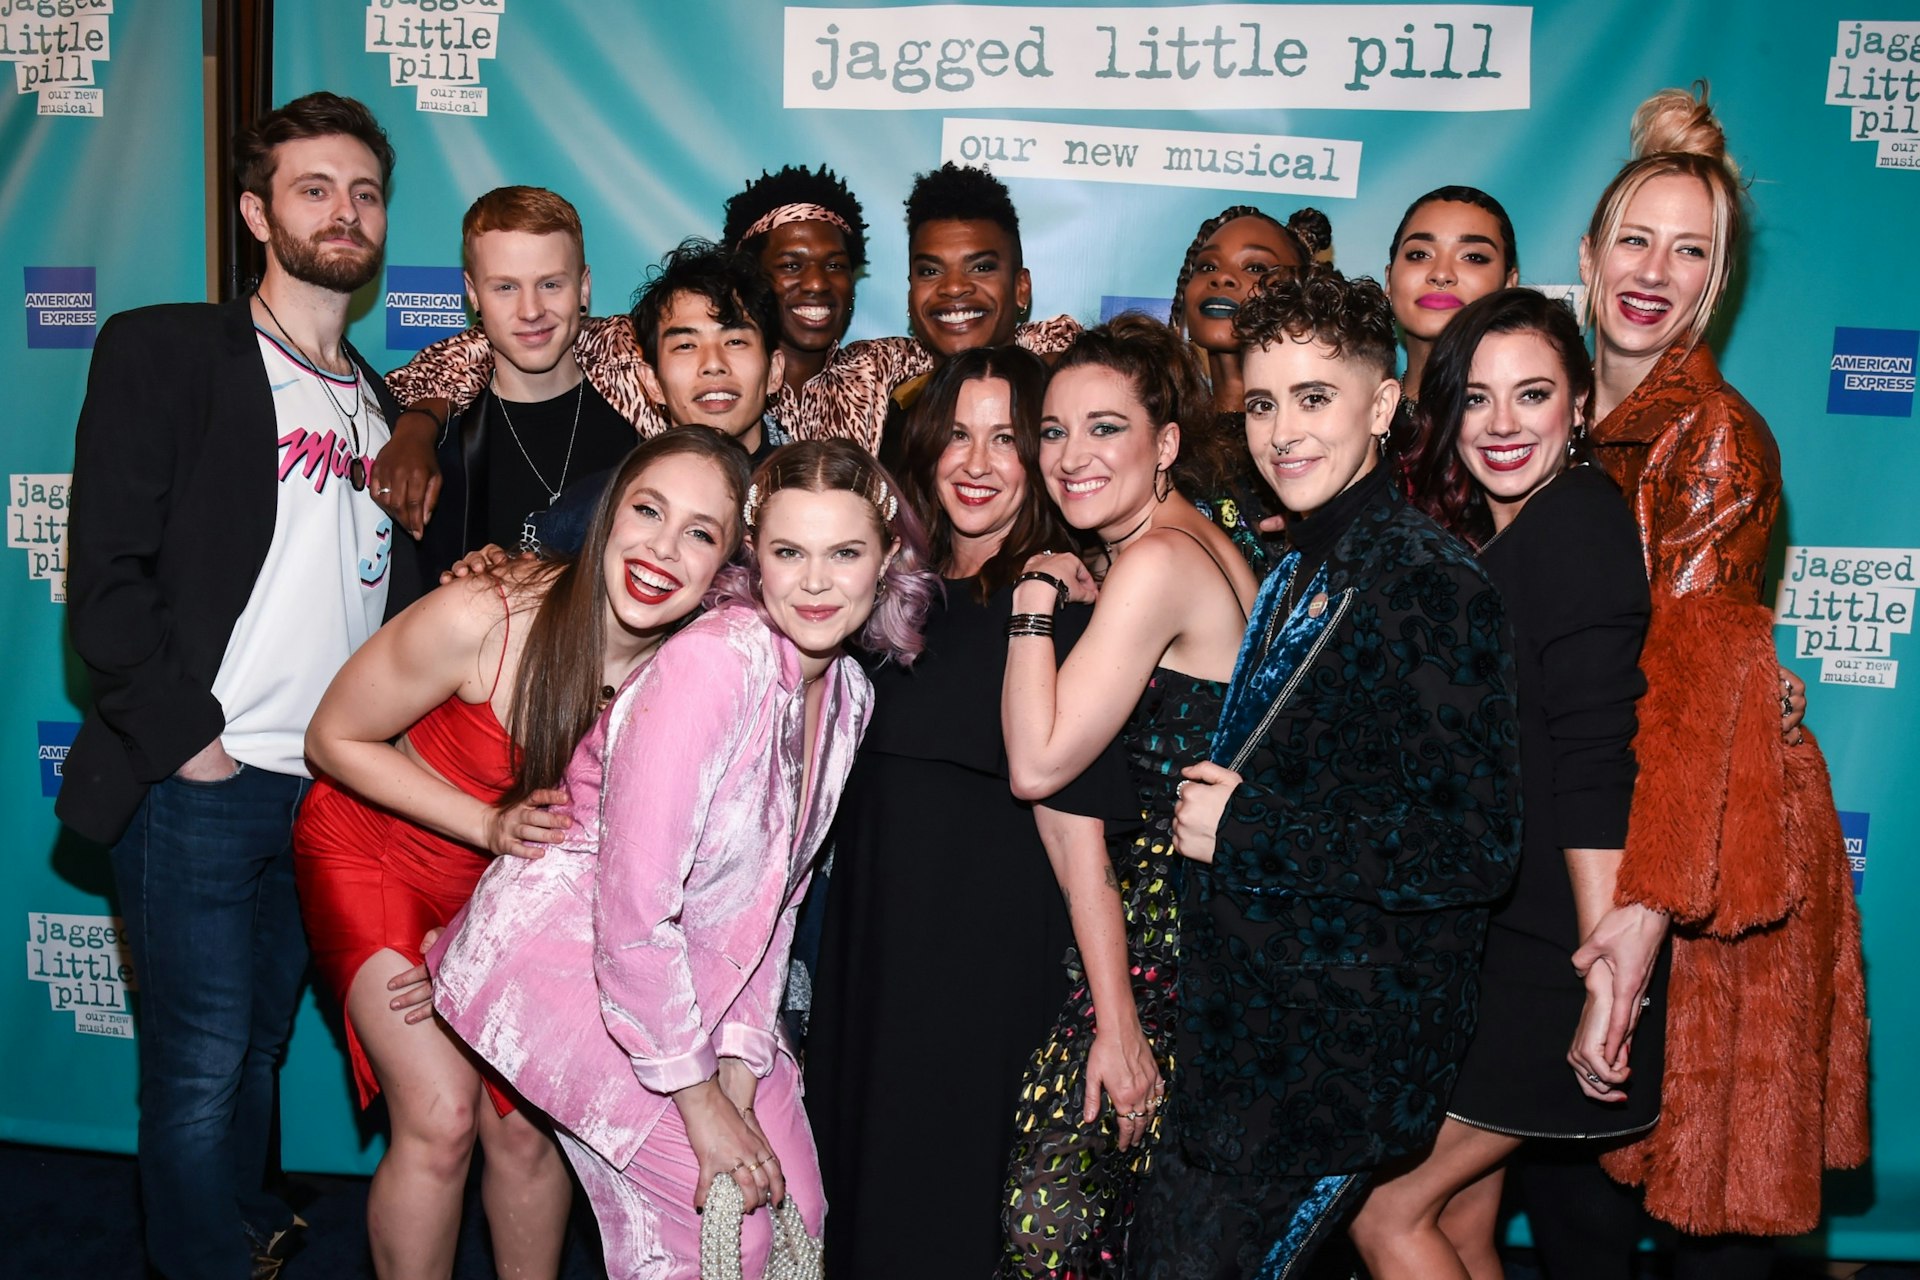 Singer Alanis Morisette with the cast of "Jagged Little Pill" in front of a photo backdrop